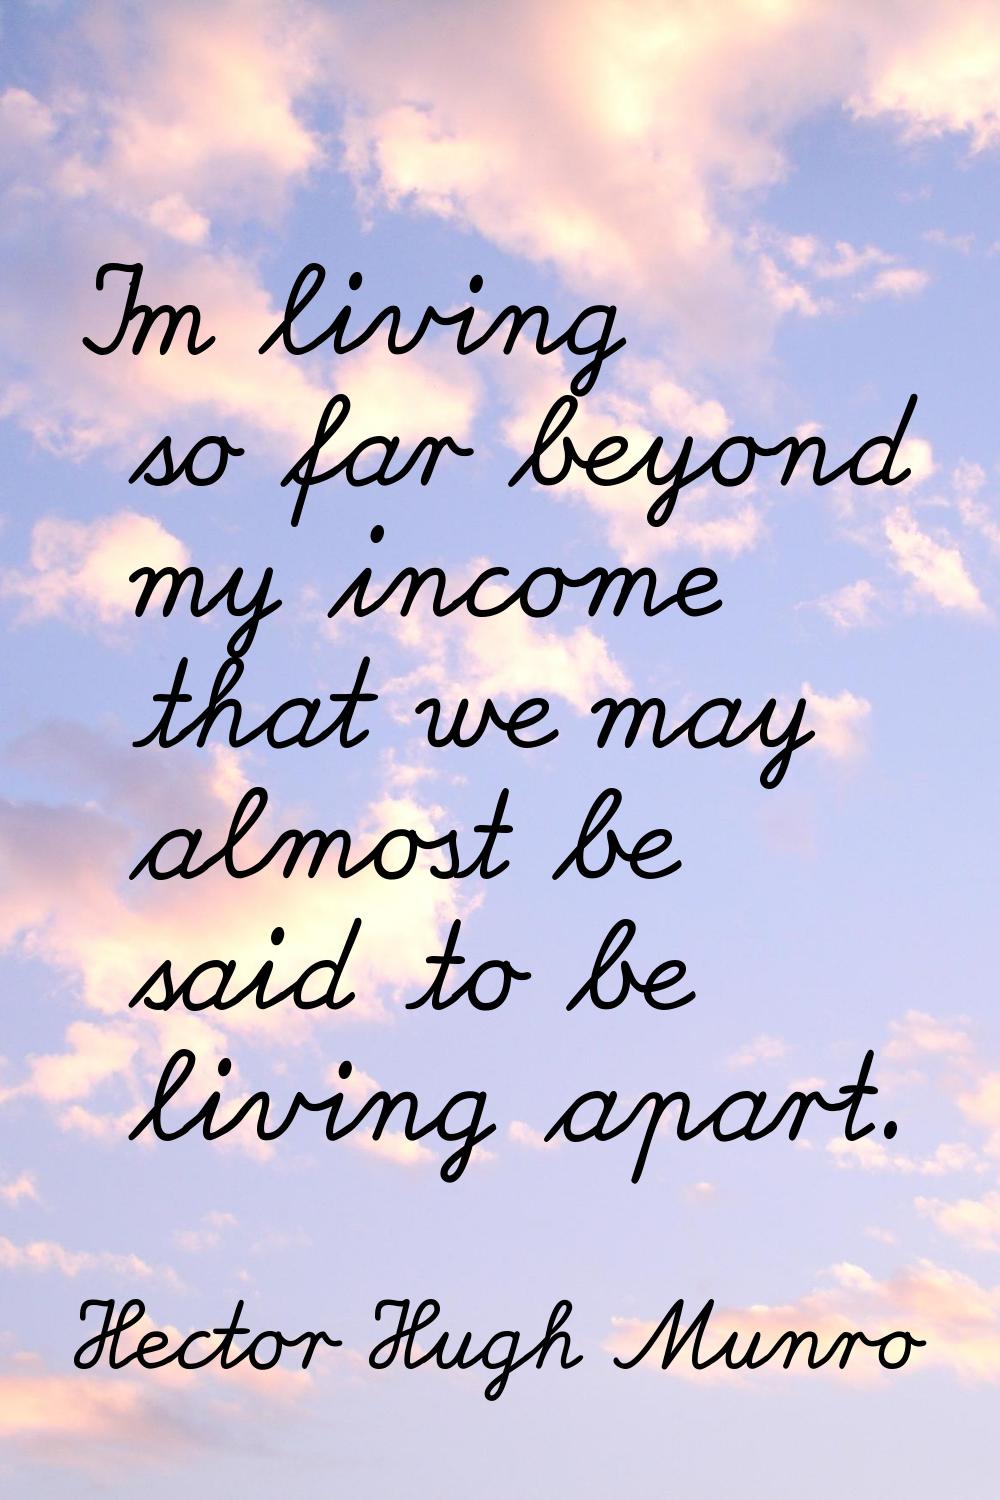 I'm living so far beyond my income that we may almost be said to be living apart.